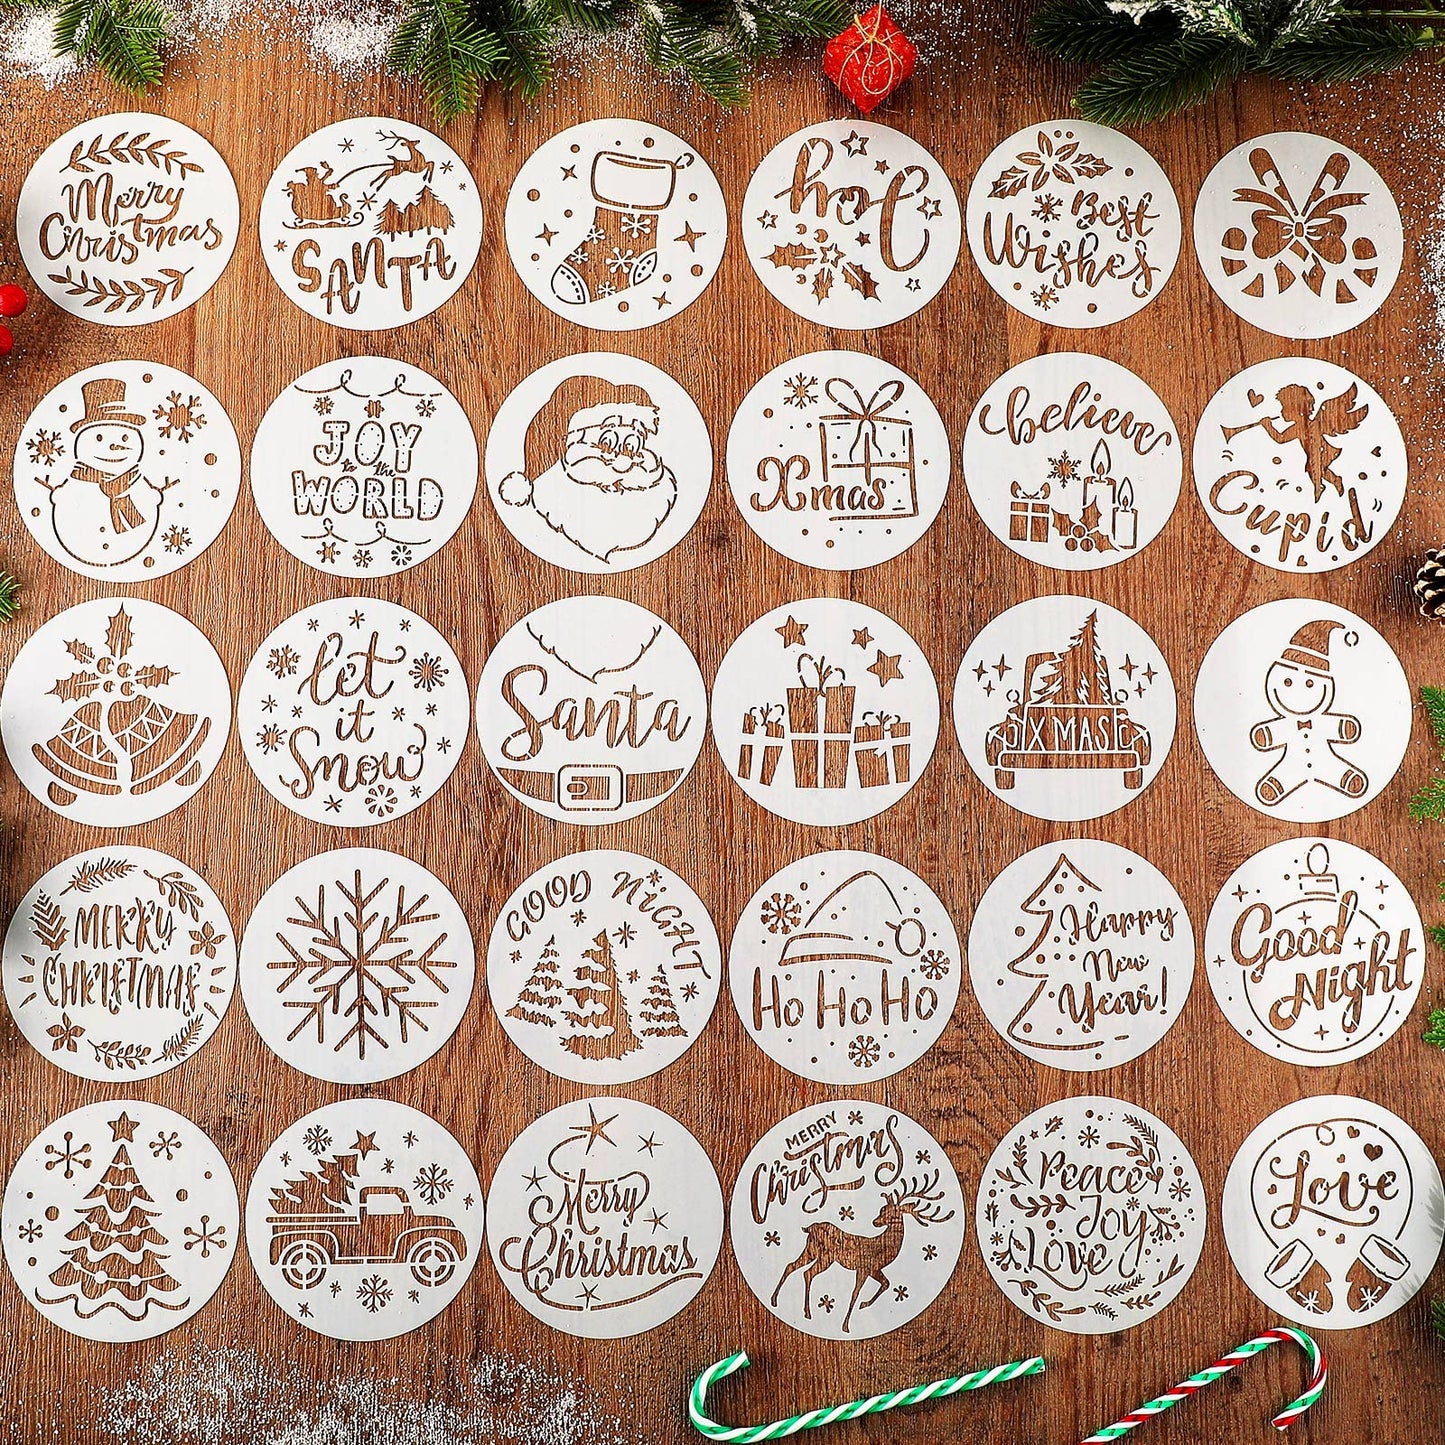 60 Pcs Christmas Stencils Reusable Stencils for Painting on Wood Snowflake Snowman Santa Stencils Holiday Small Stencils Xmas Stencil Template for DIY Wood Signs Wall Art Crafts Decor